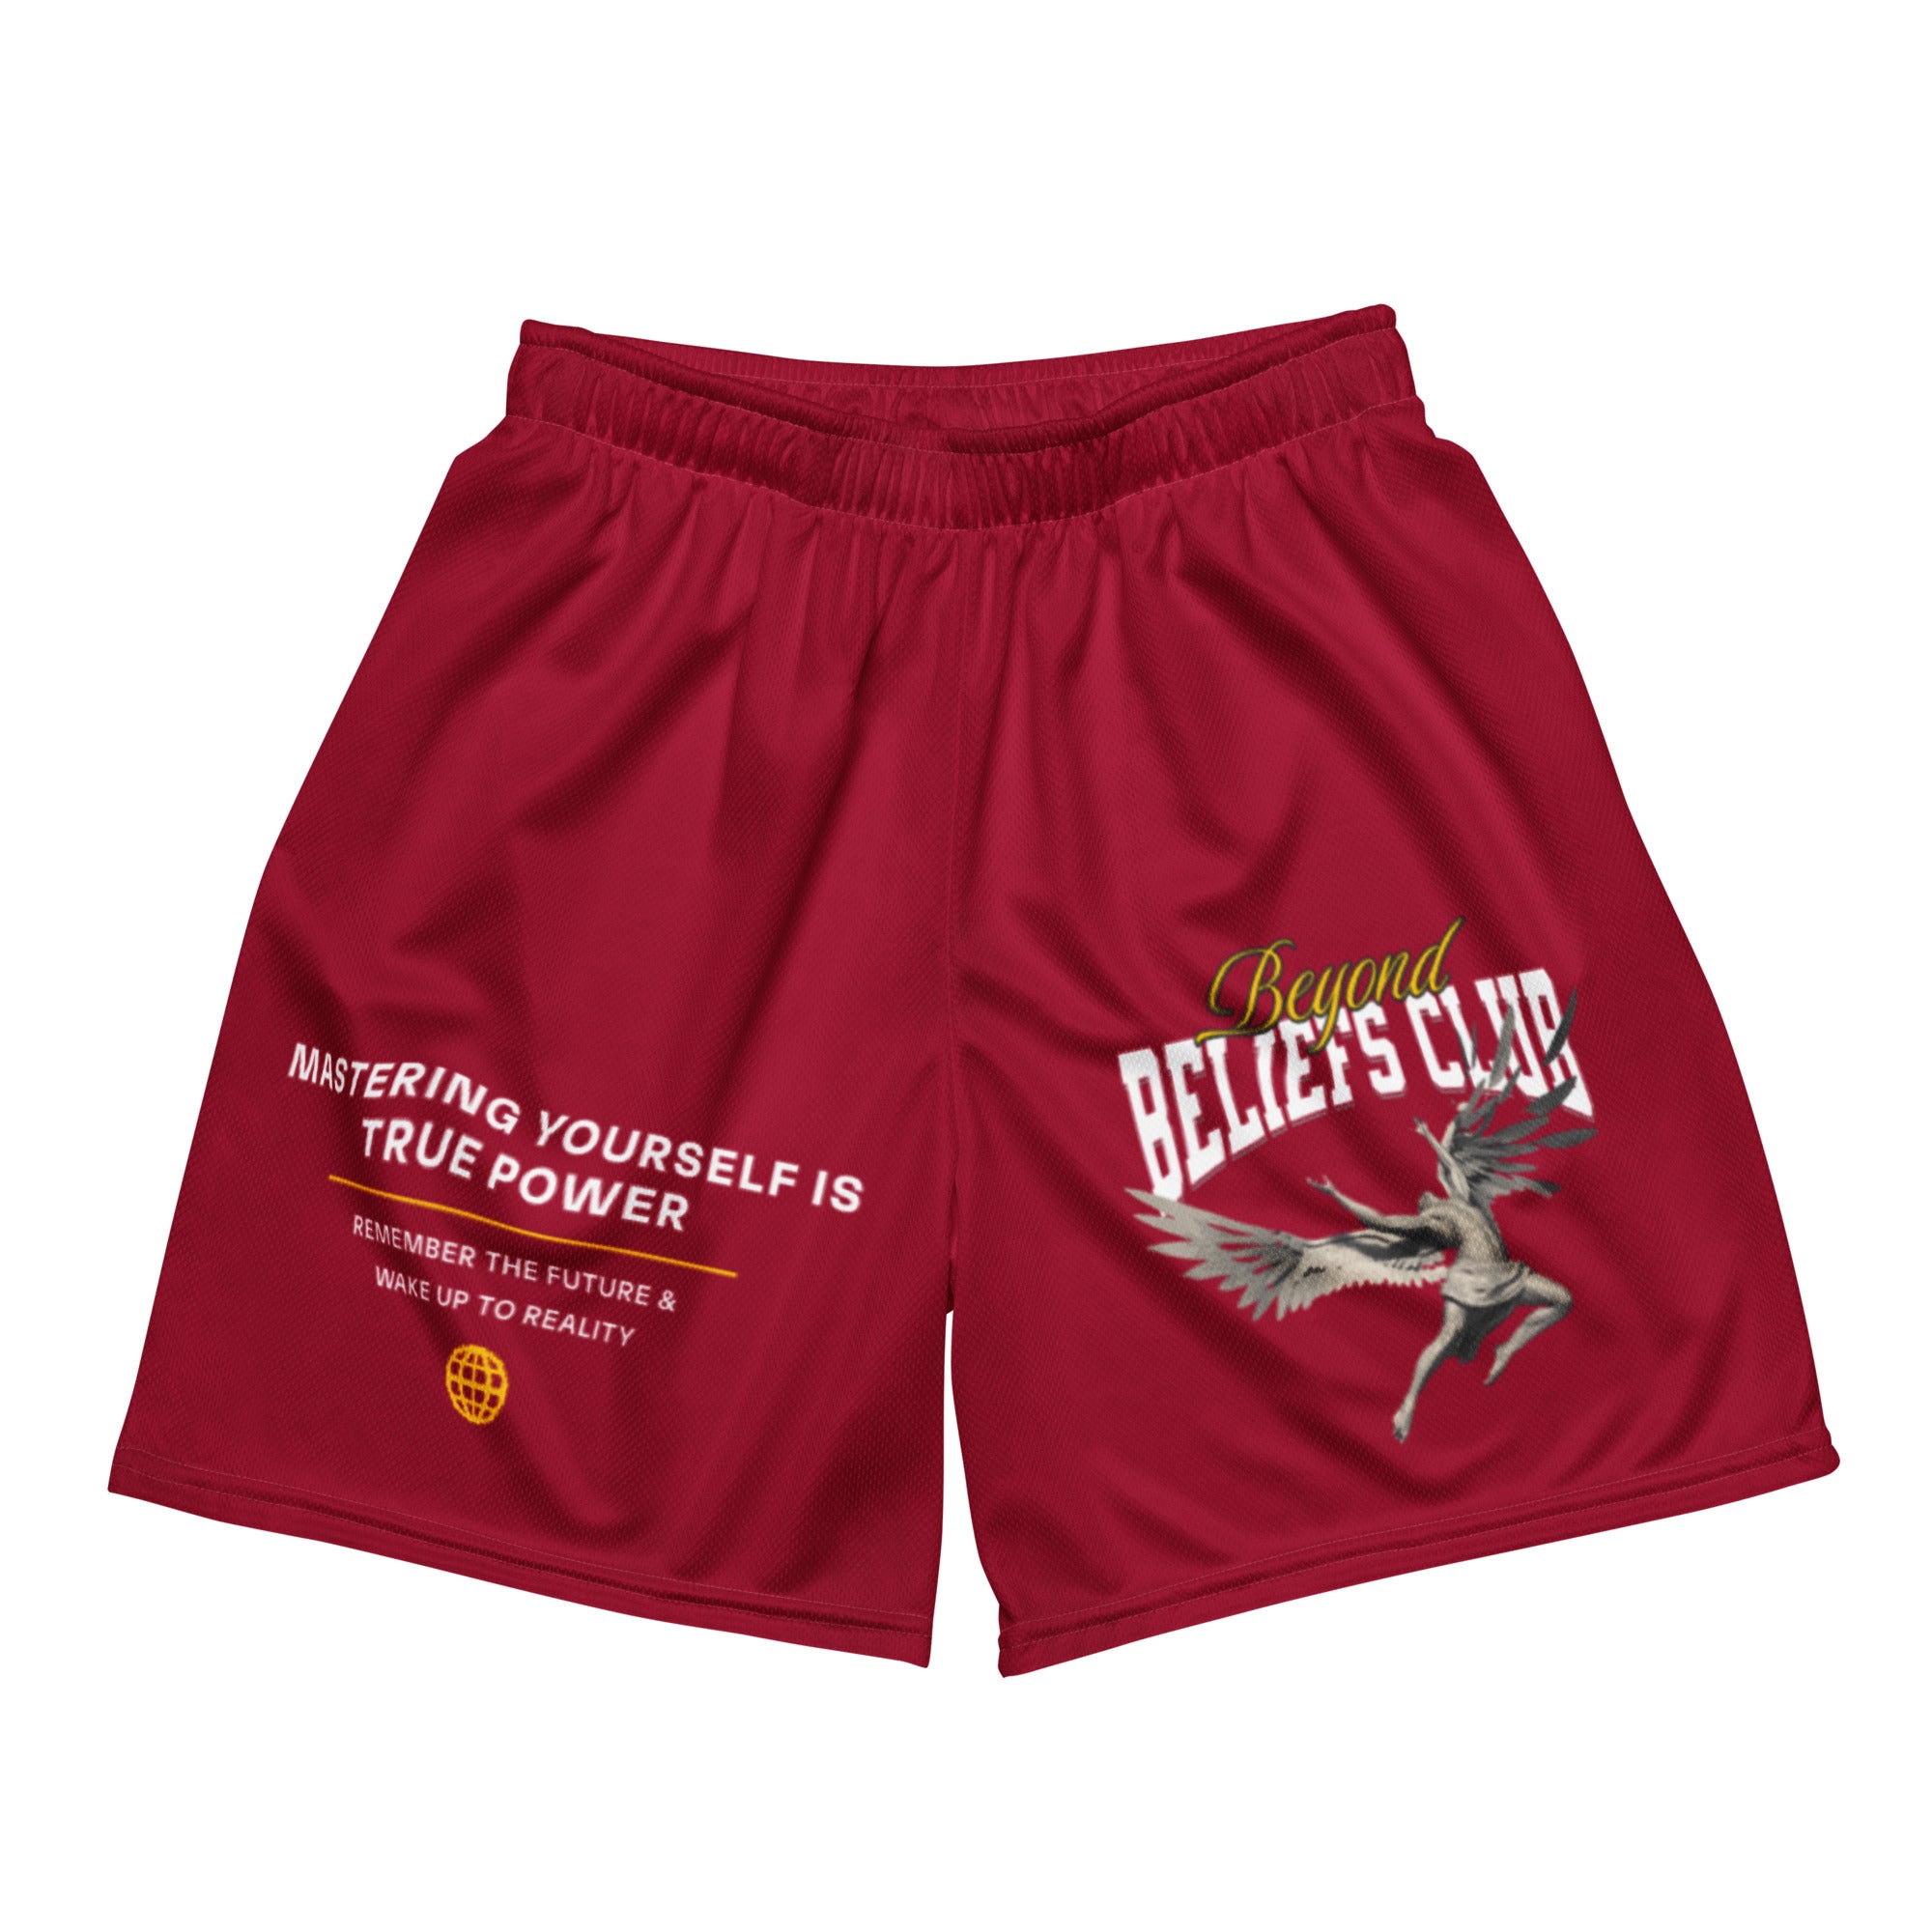 ICARUS SHORTS - RED WINE